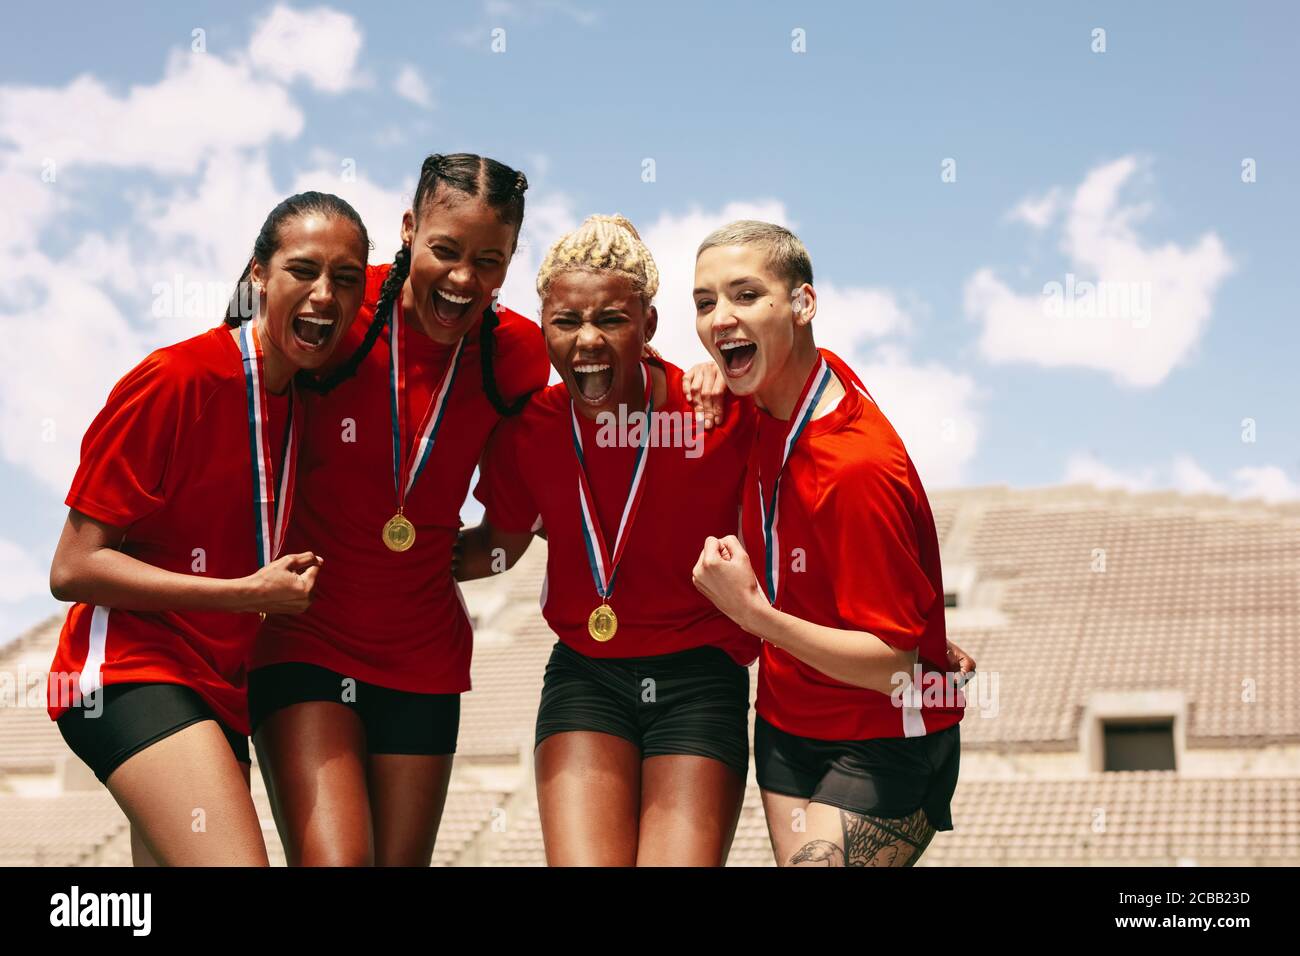 Female football team celebrating the victory at stadium. Woman soccer players with medals shouting in joy after winning the championship. Stock Photo